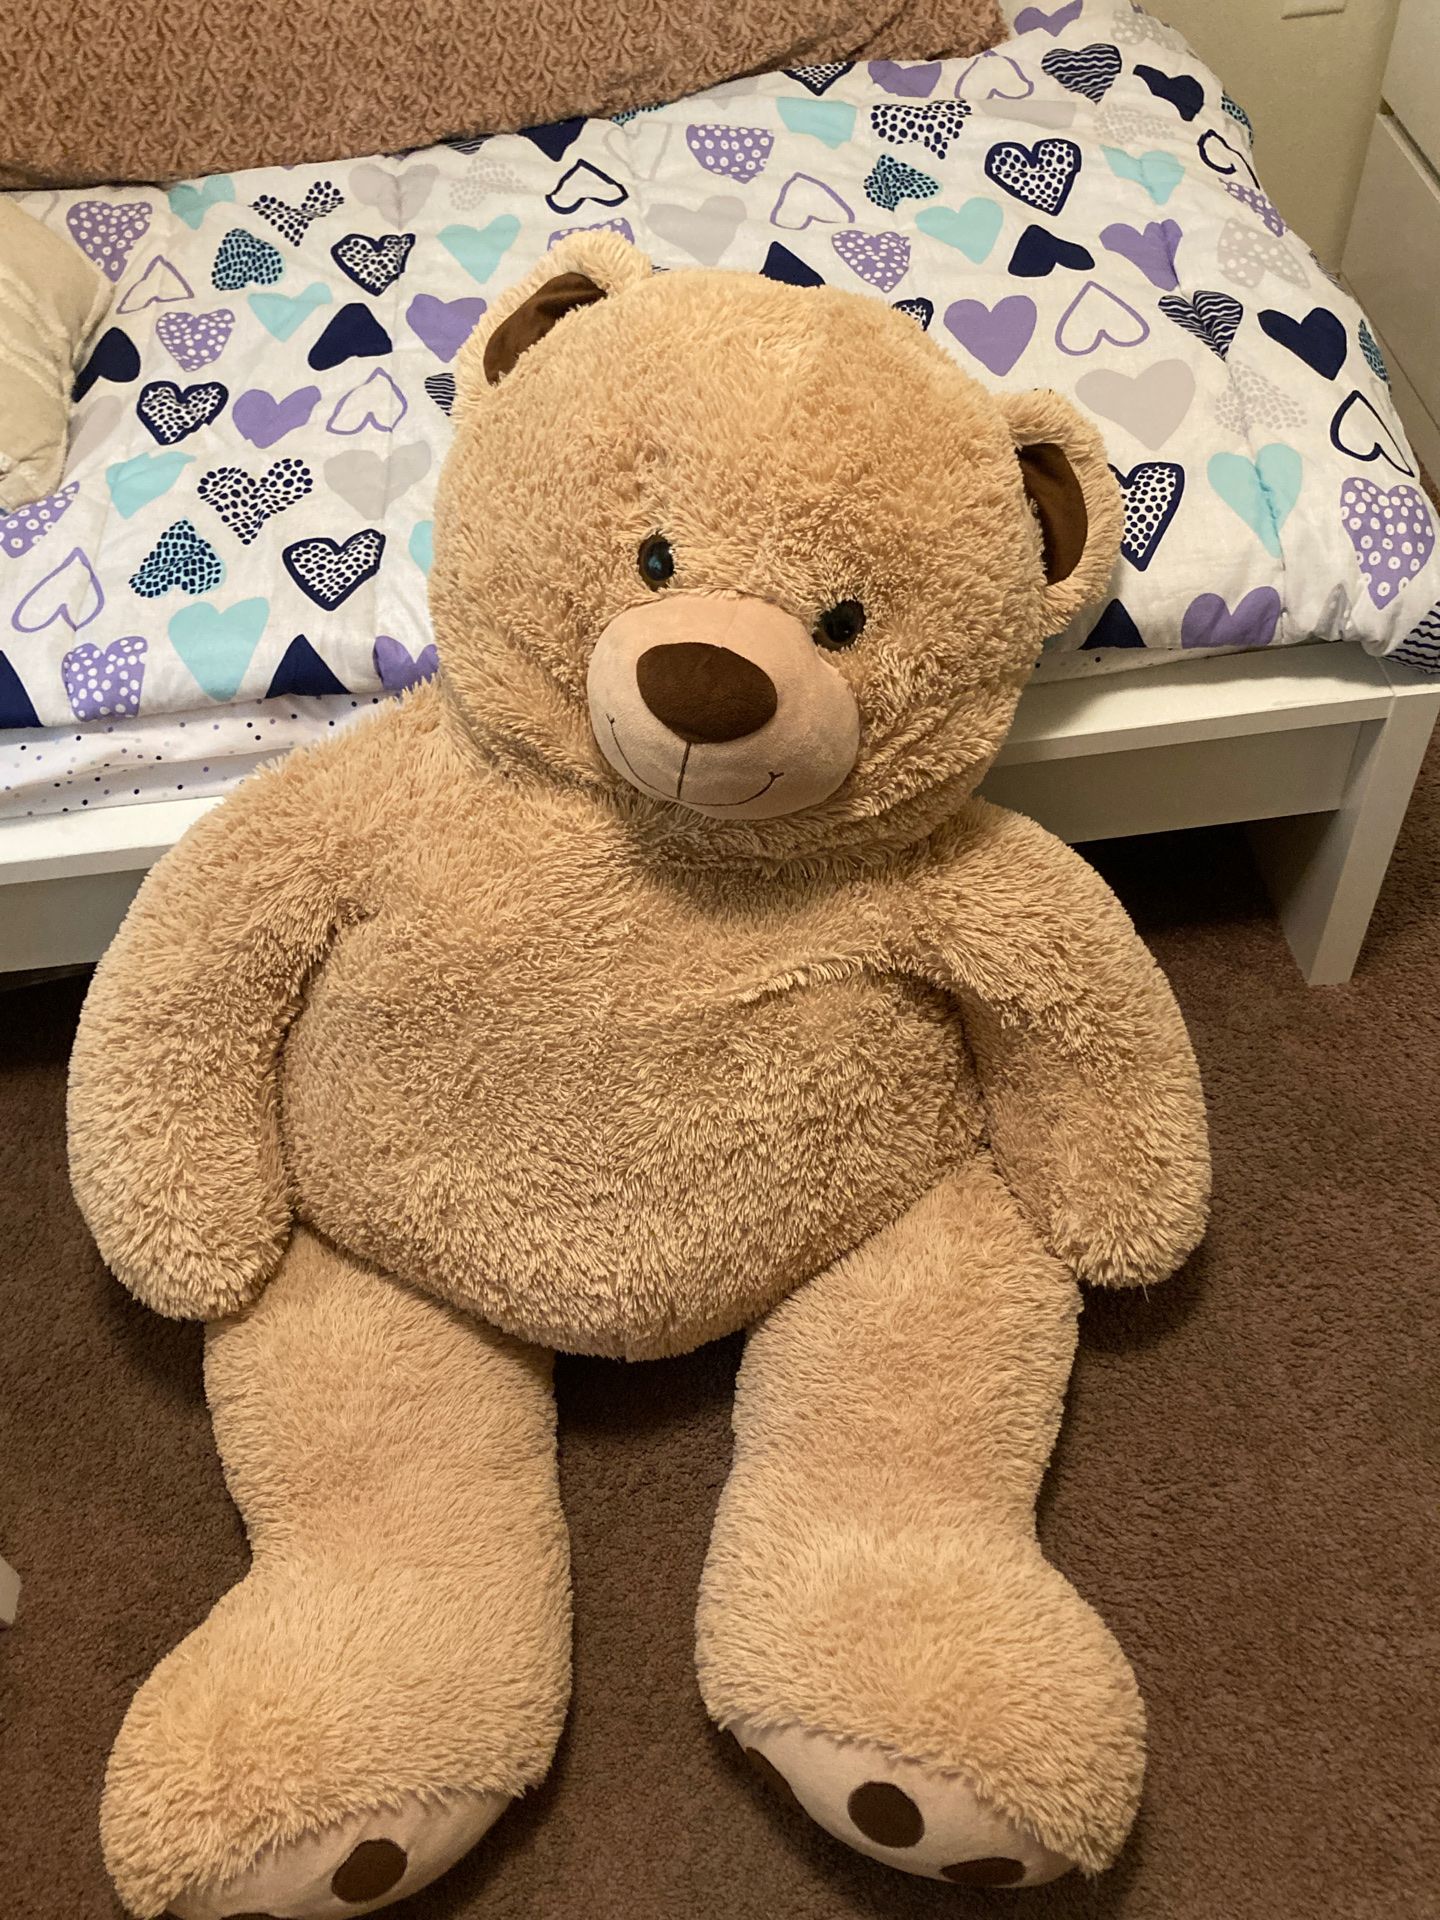 Big teddy bear. Super soft and fun to sit/lay on. Barley used. Used as a display item.